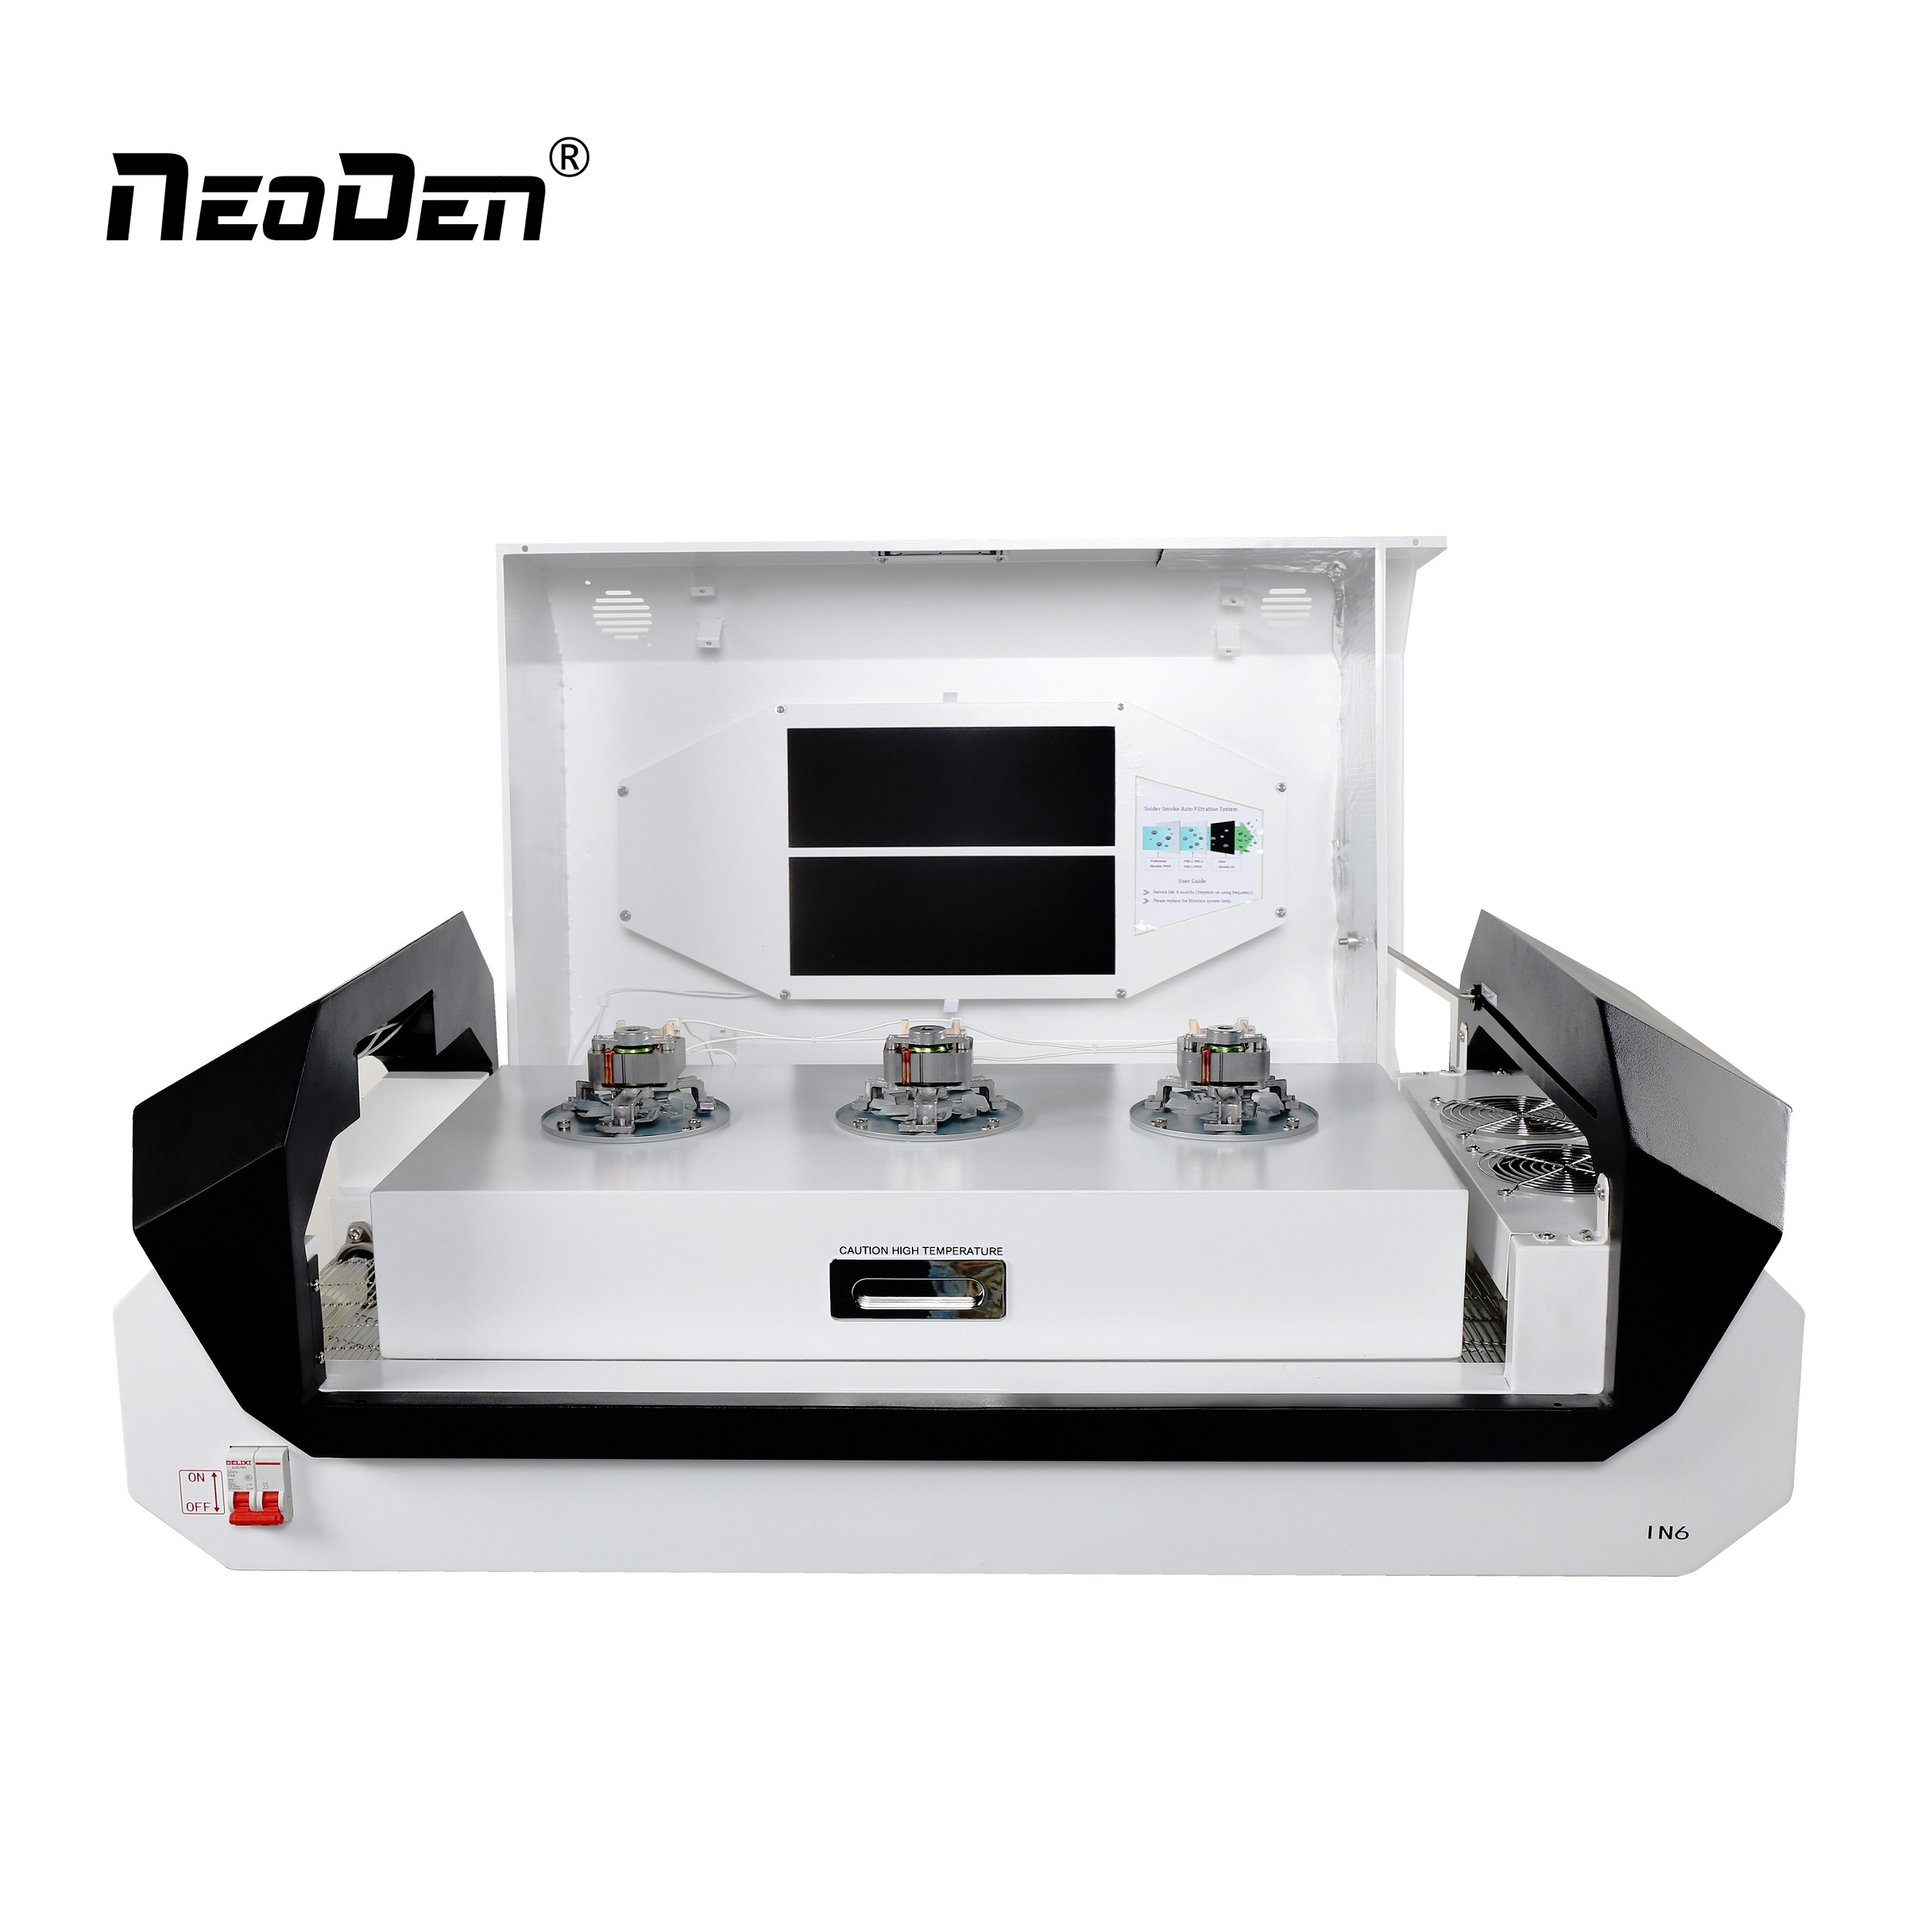 China Factory for Heavy Duty Reflow Oven - Automatic SMD soldering machine NeoDen IN6 – Neoden